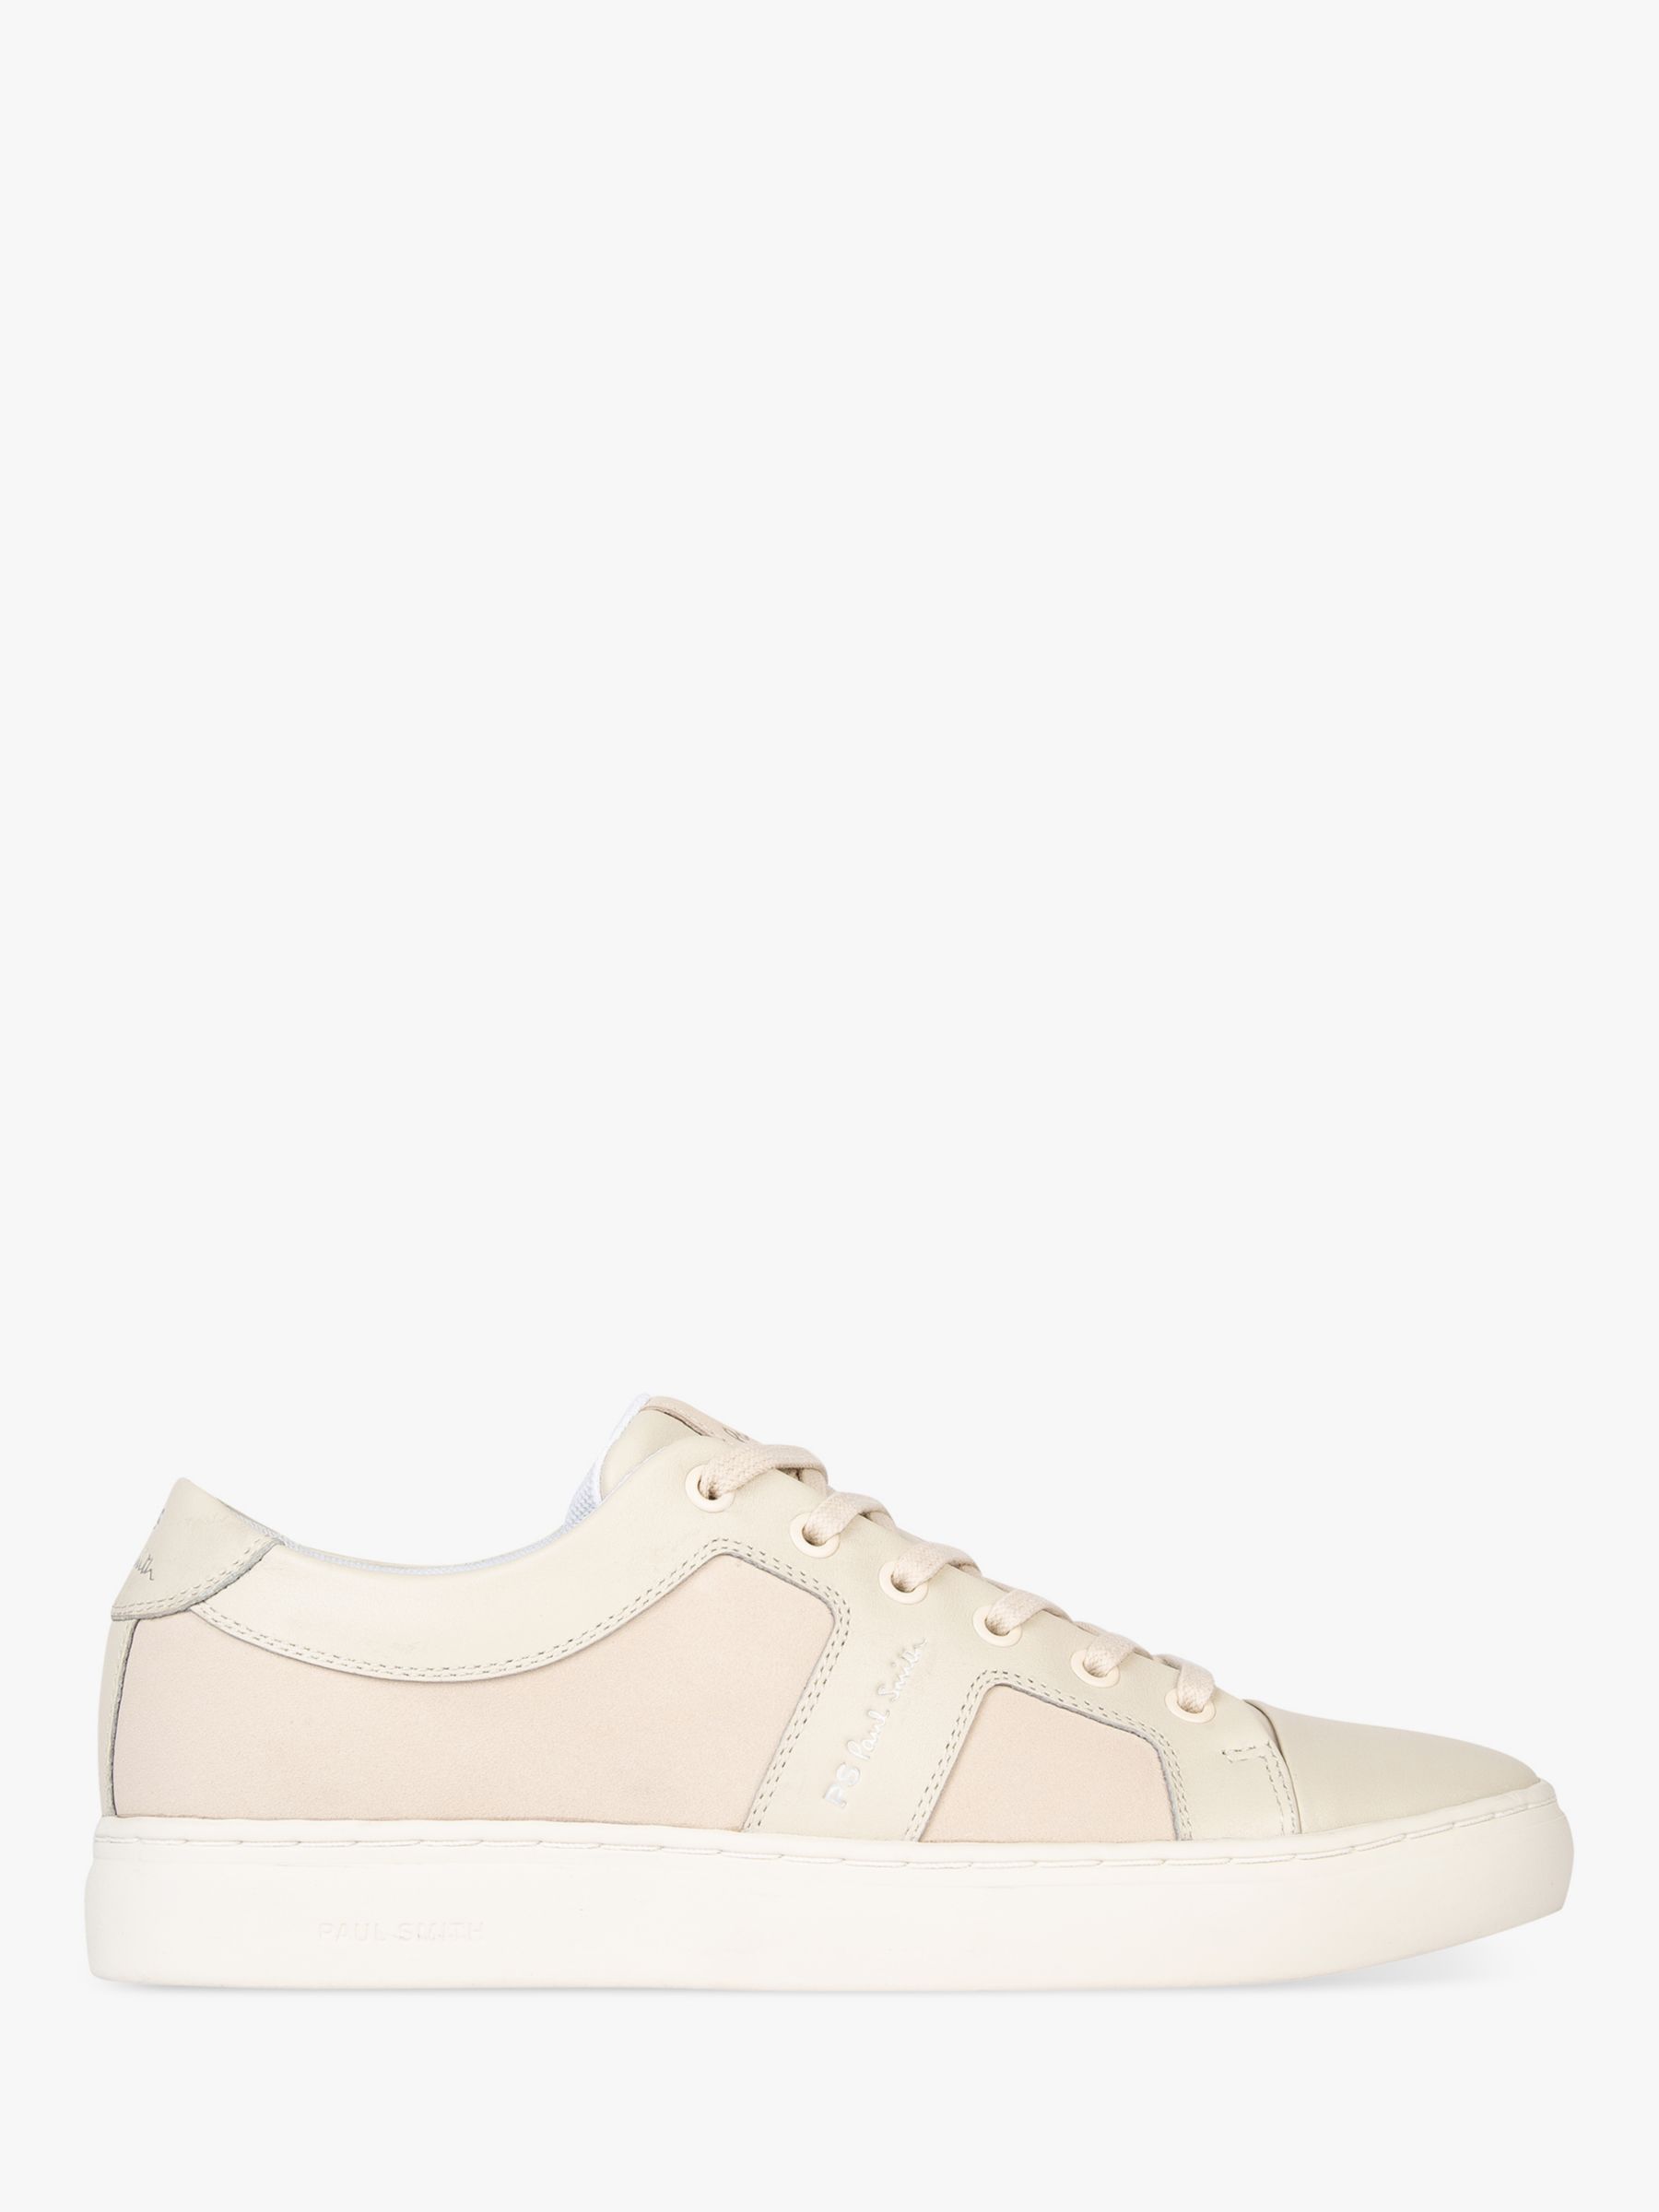 Paul Smith Vanda Leather Trainers, Off White